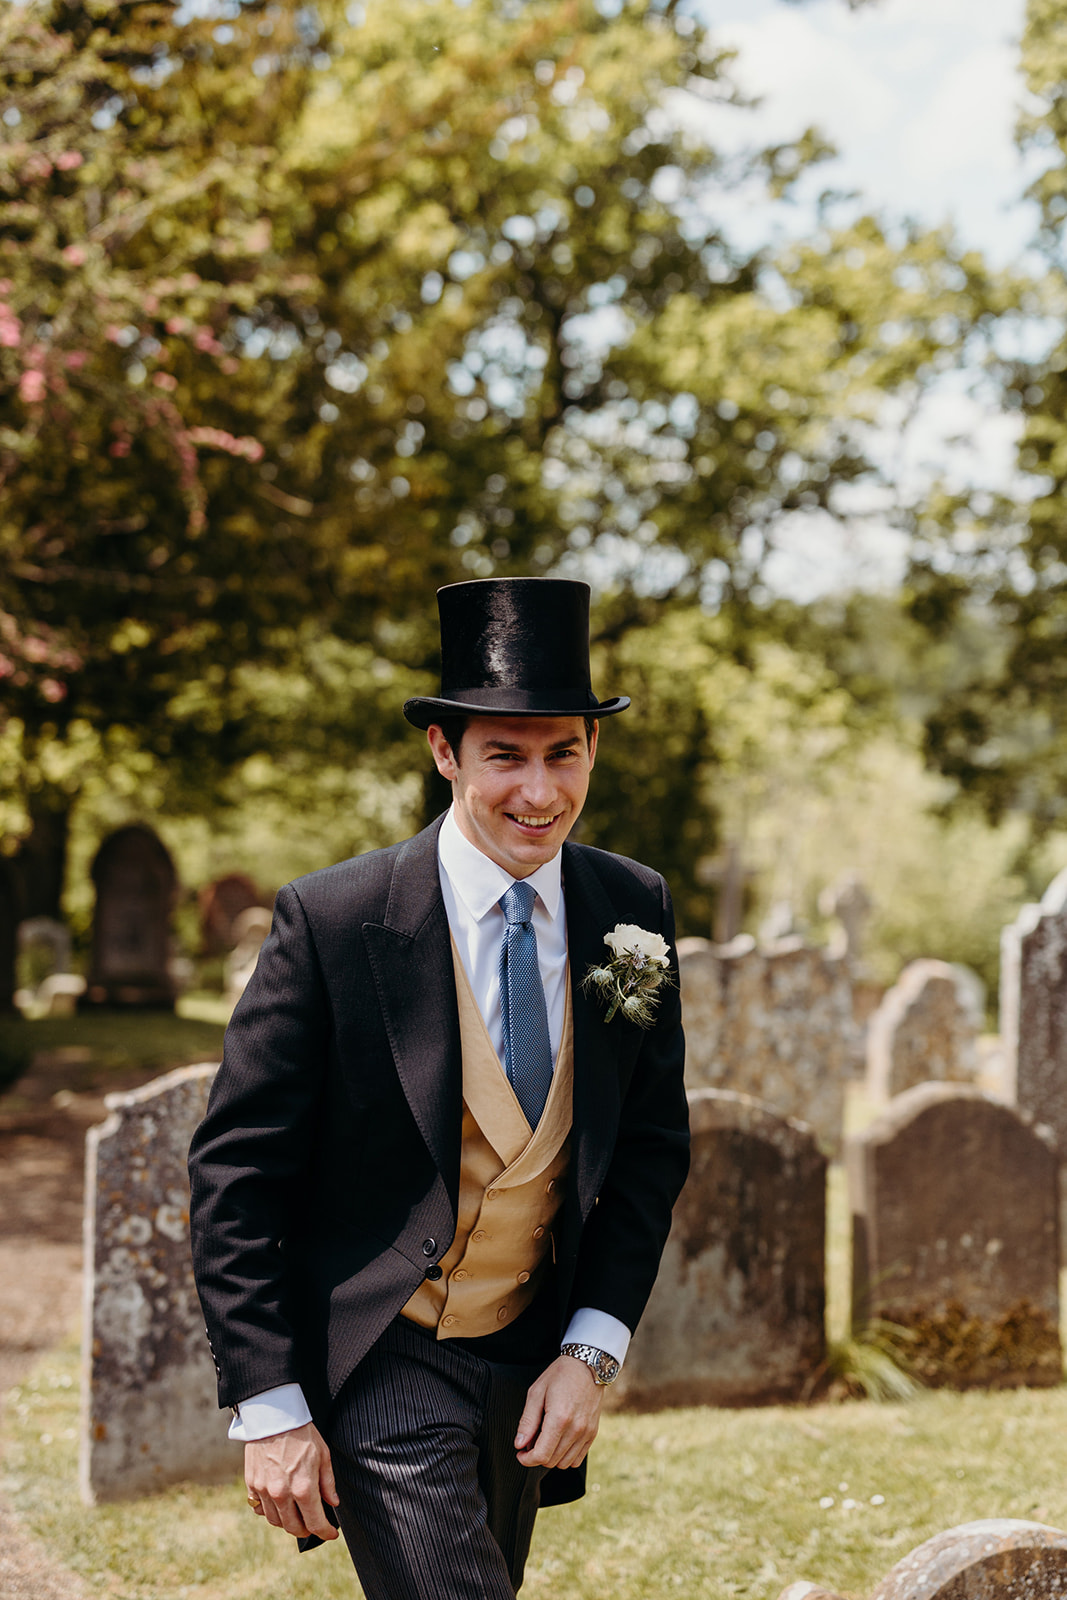 Ed sporting a top hat, adding aristocratic flair to the country house wedding in East Sussex.